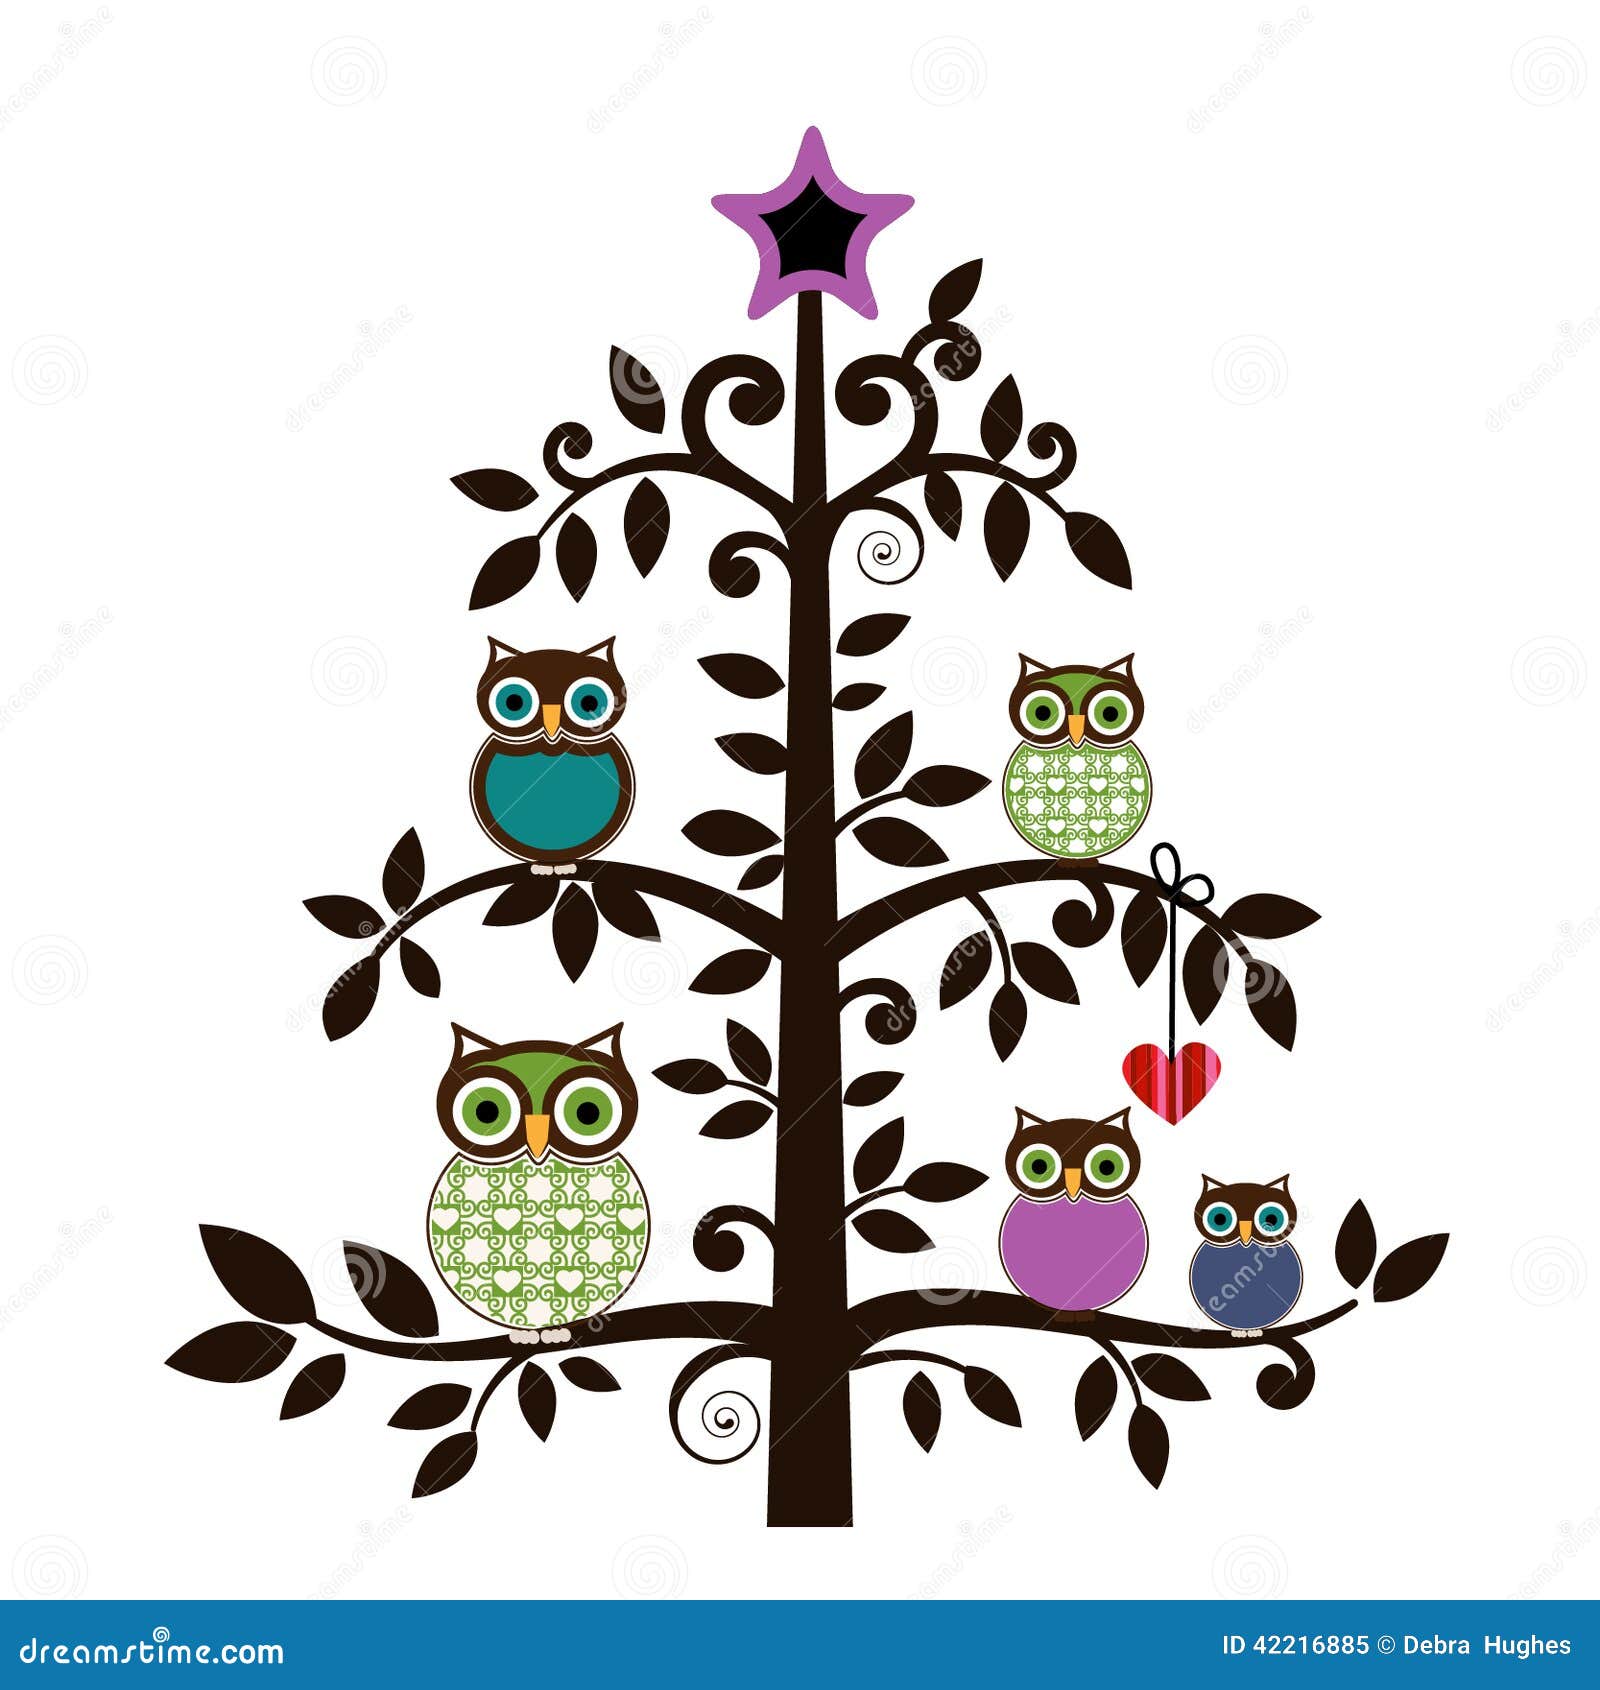 whimsical owls in a tree